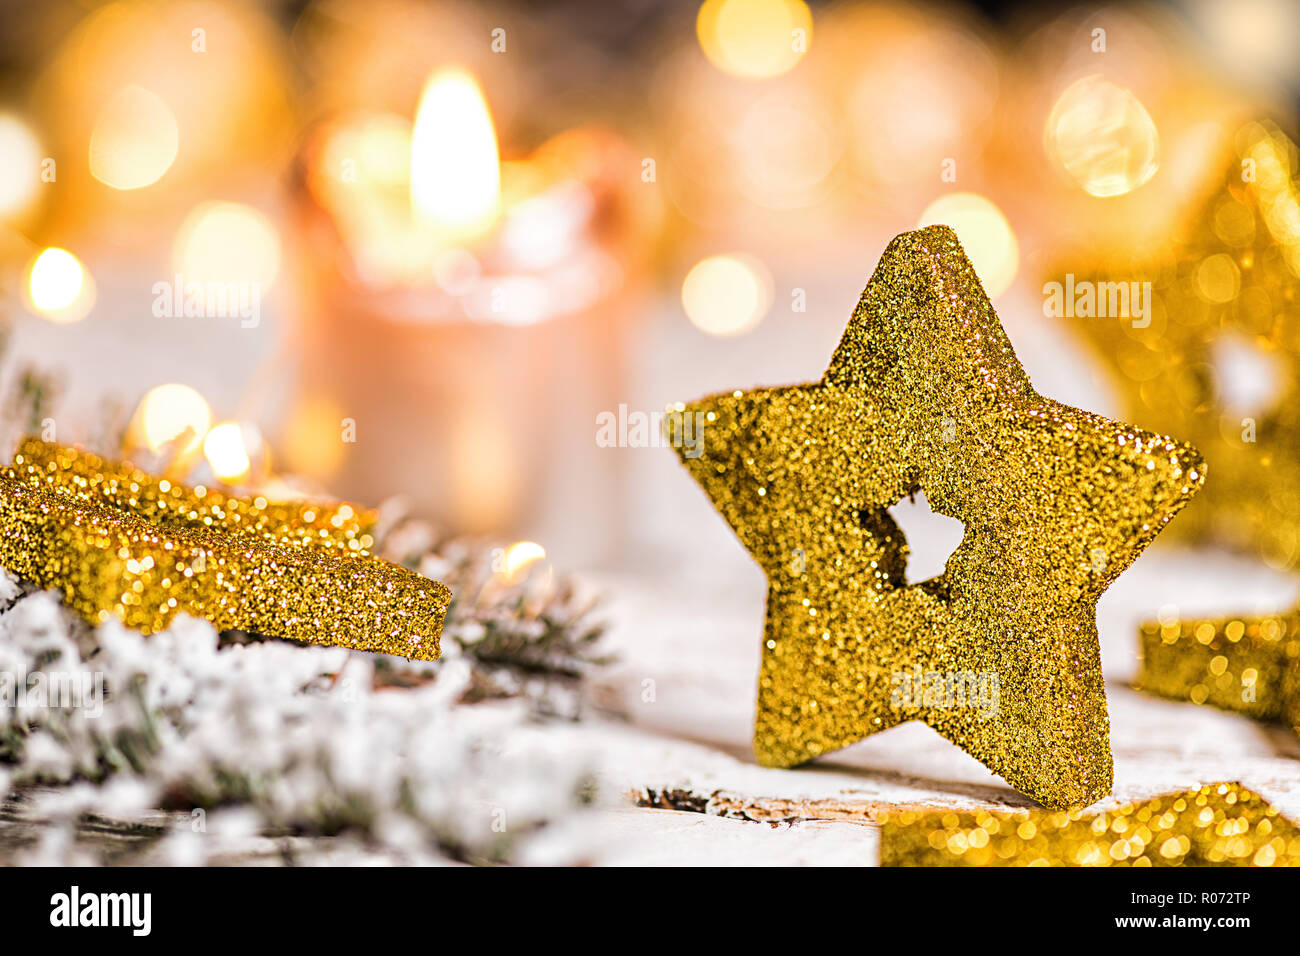 golden christmas star with candle, fir branch and lights on old wooden table Stock Photo